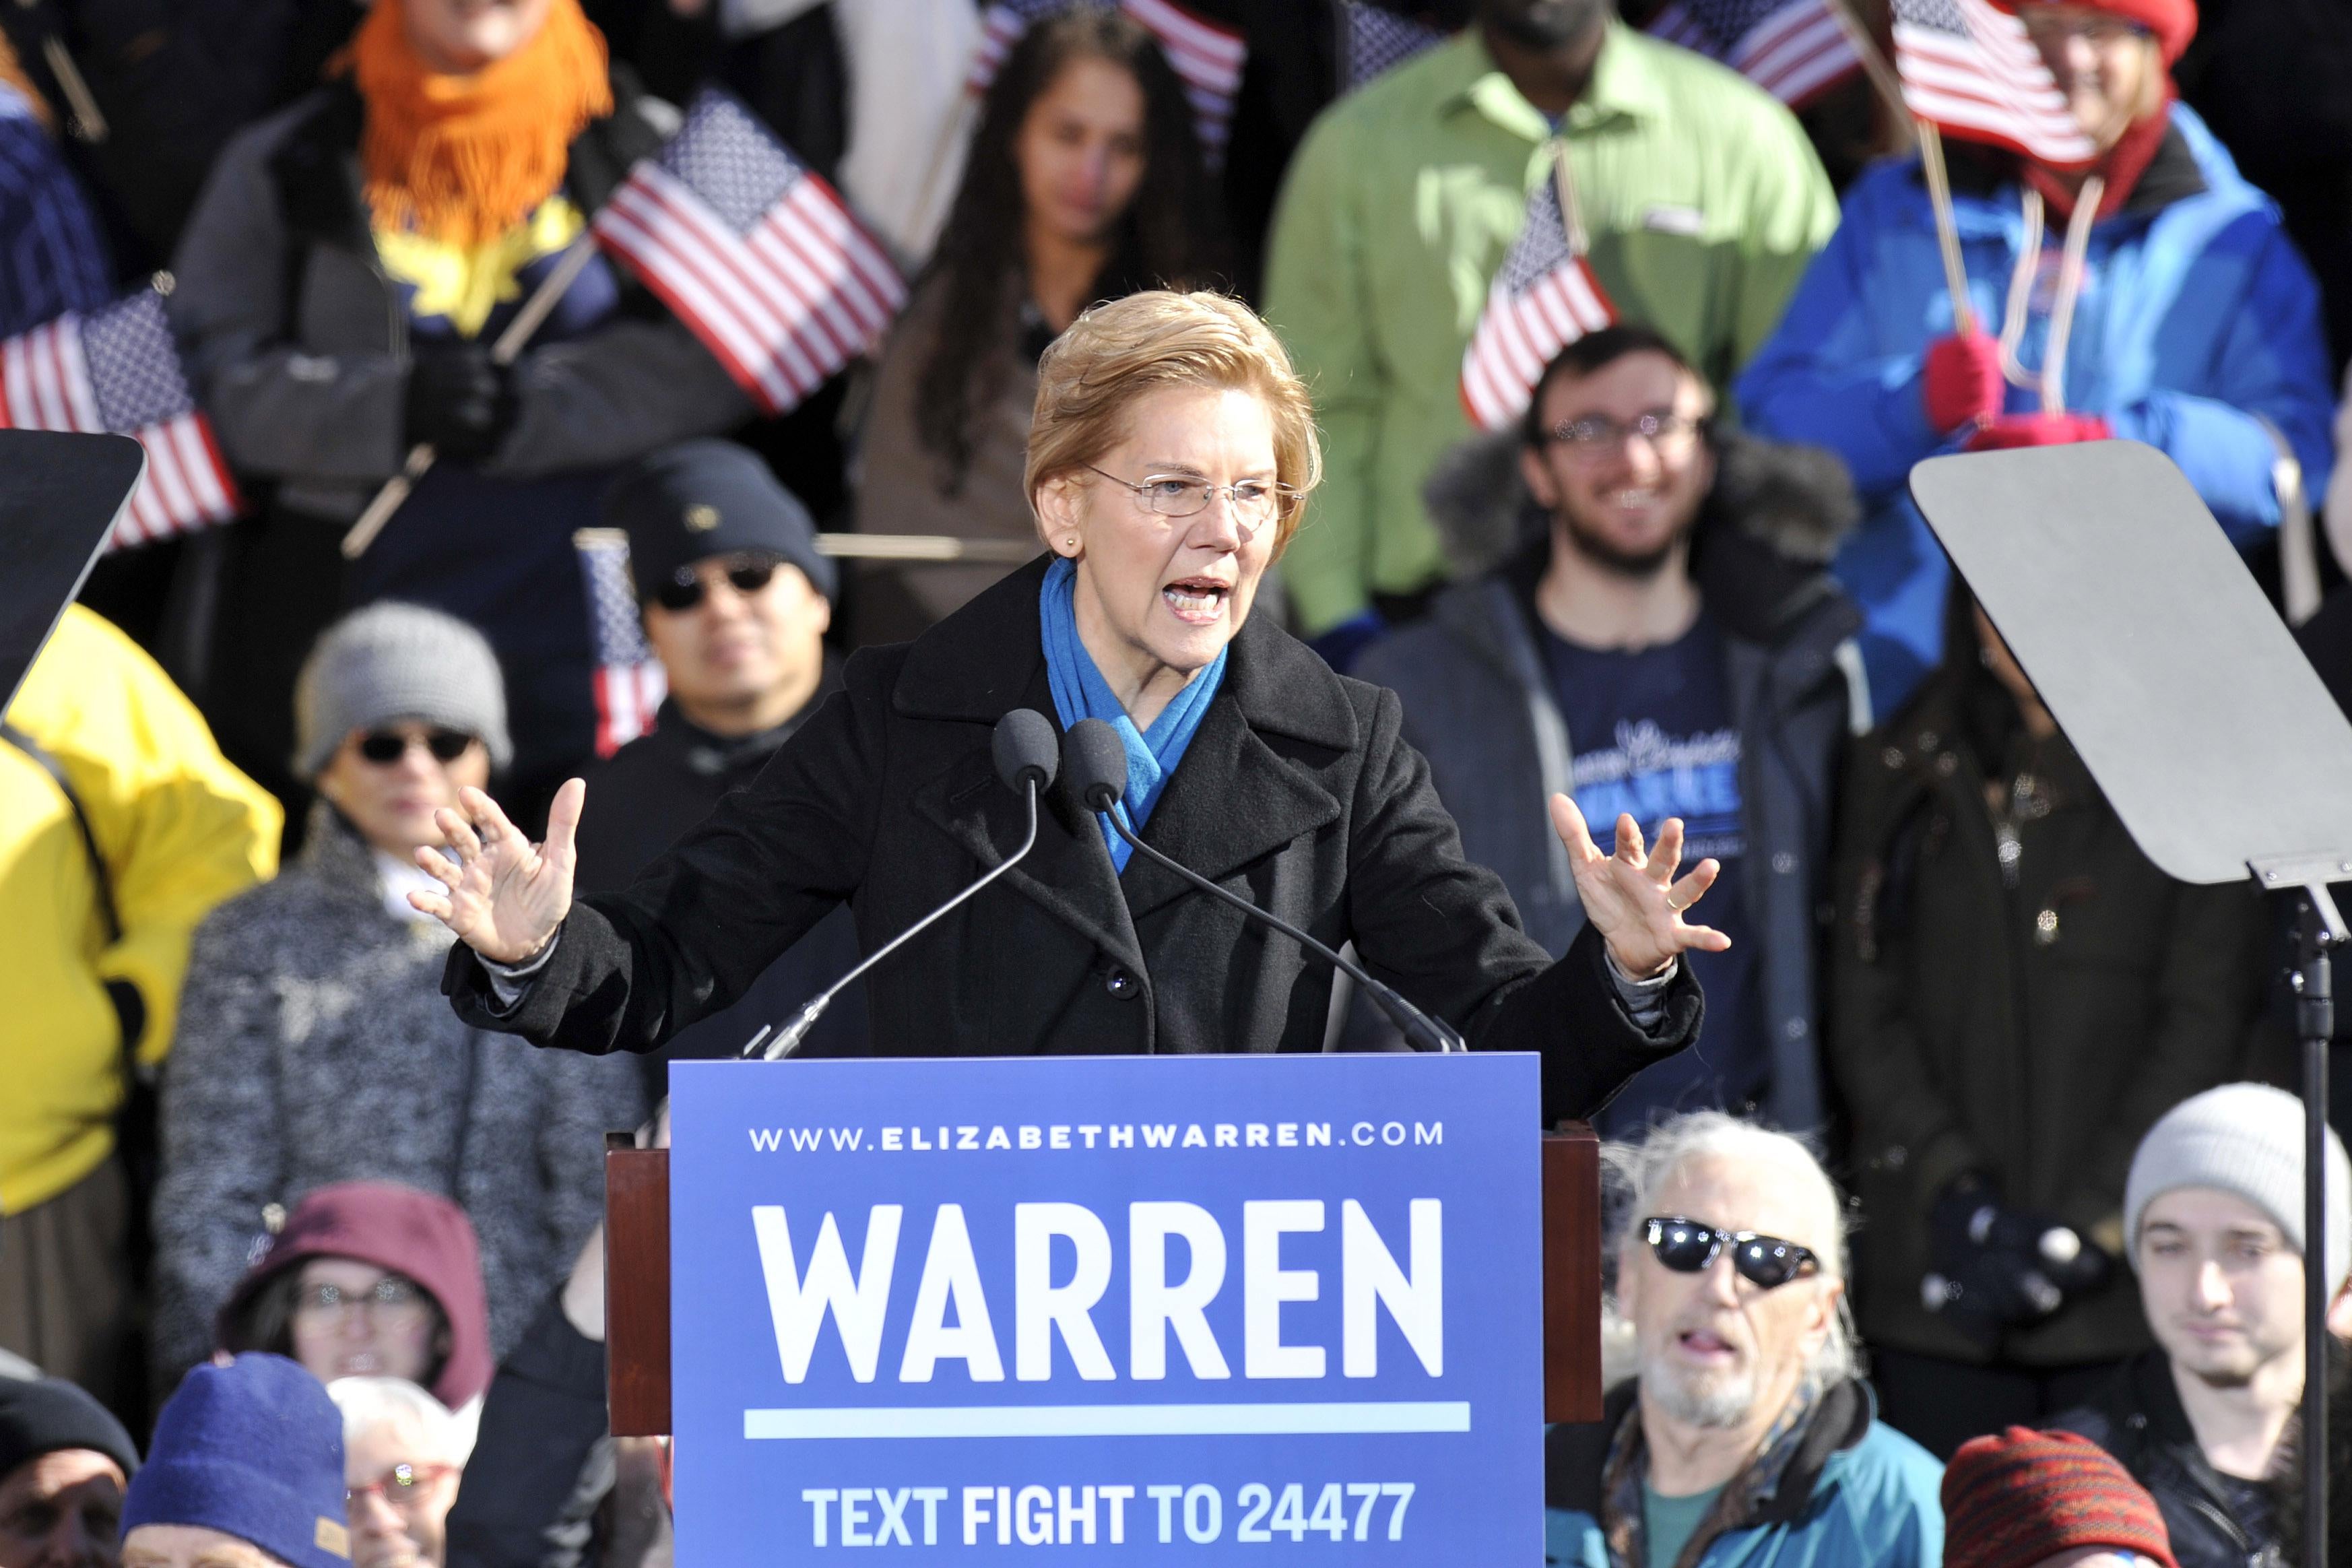 Senator Elizabeth Warren speaks during her presidential candidacy announcement event at the Everett Mills in Lawrence, MA on February 9, 2019. 